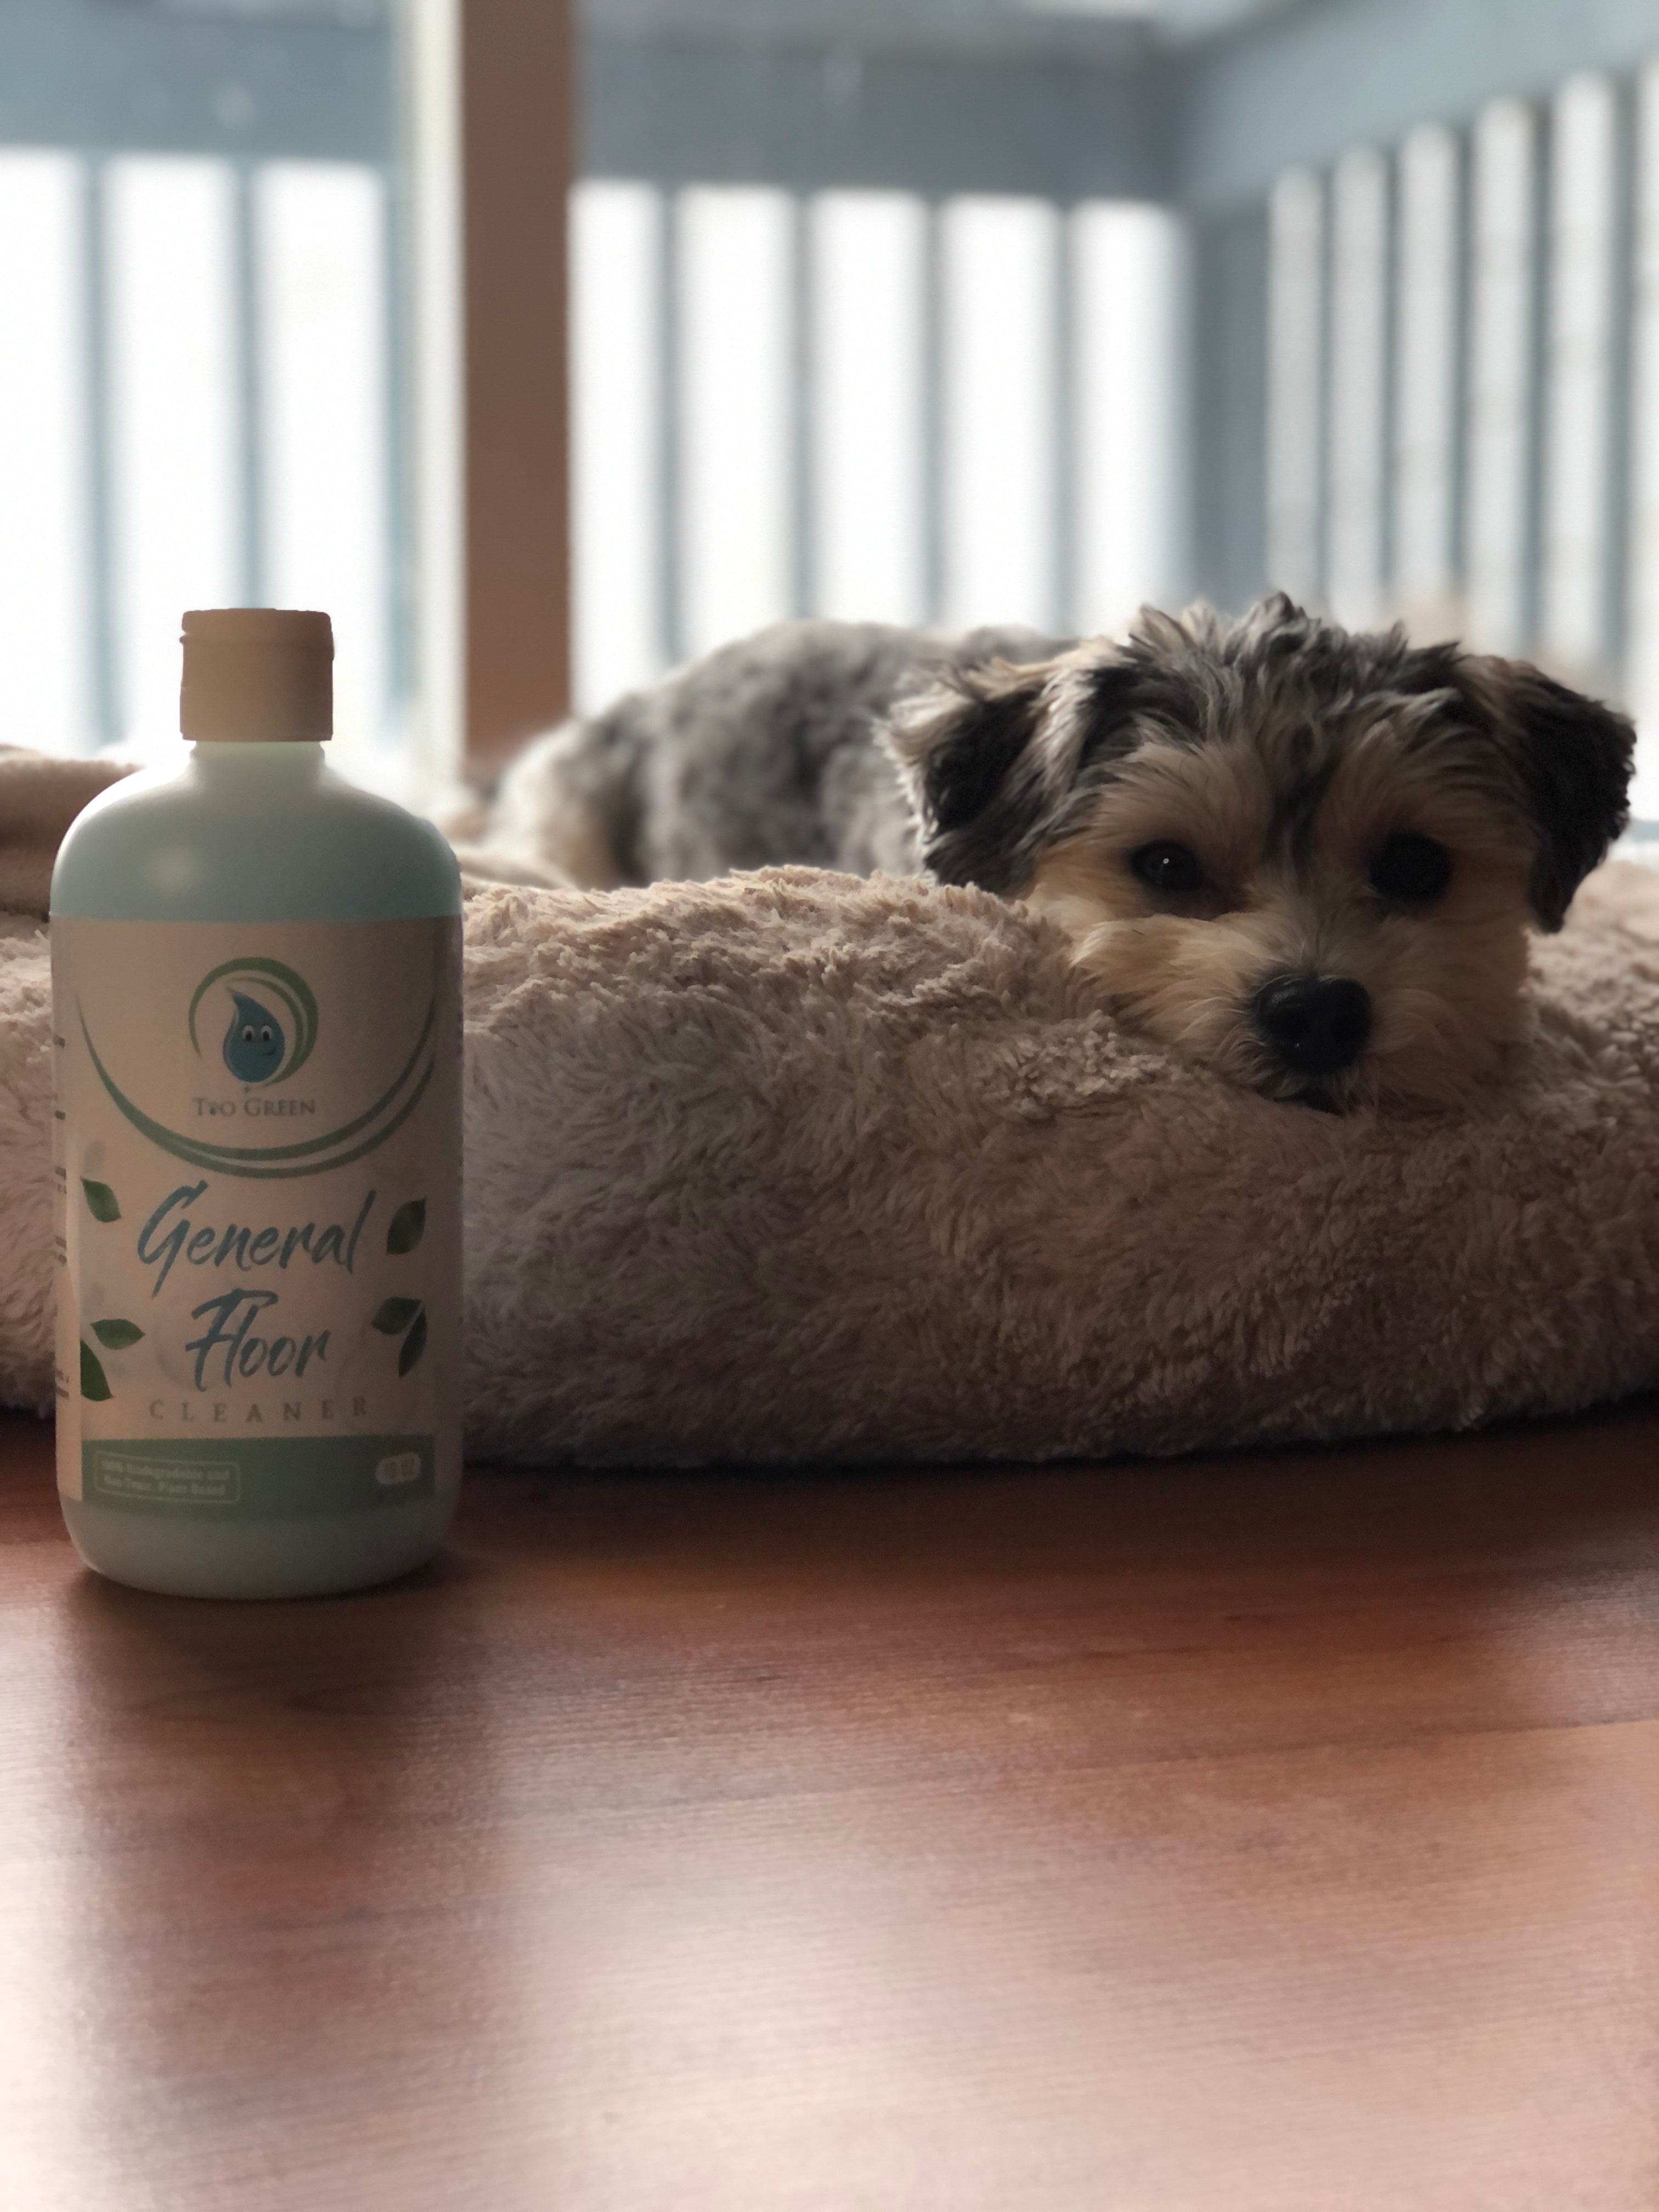 Plant based cleaning products that are kid and pet safe